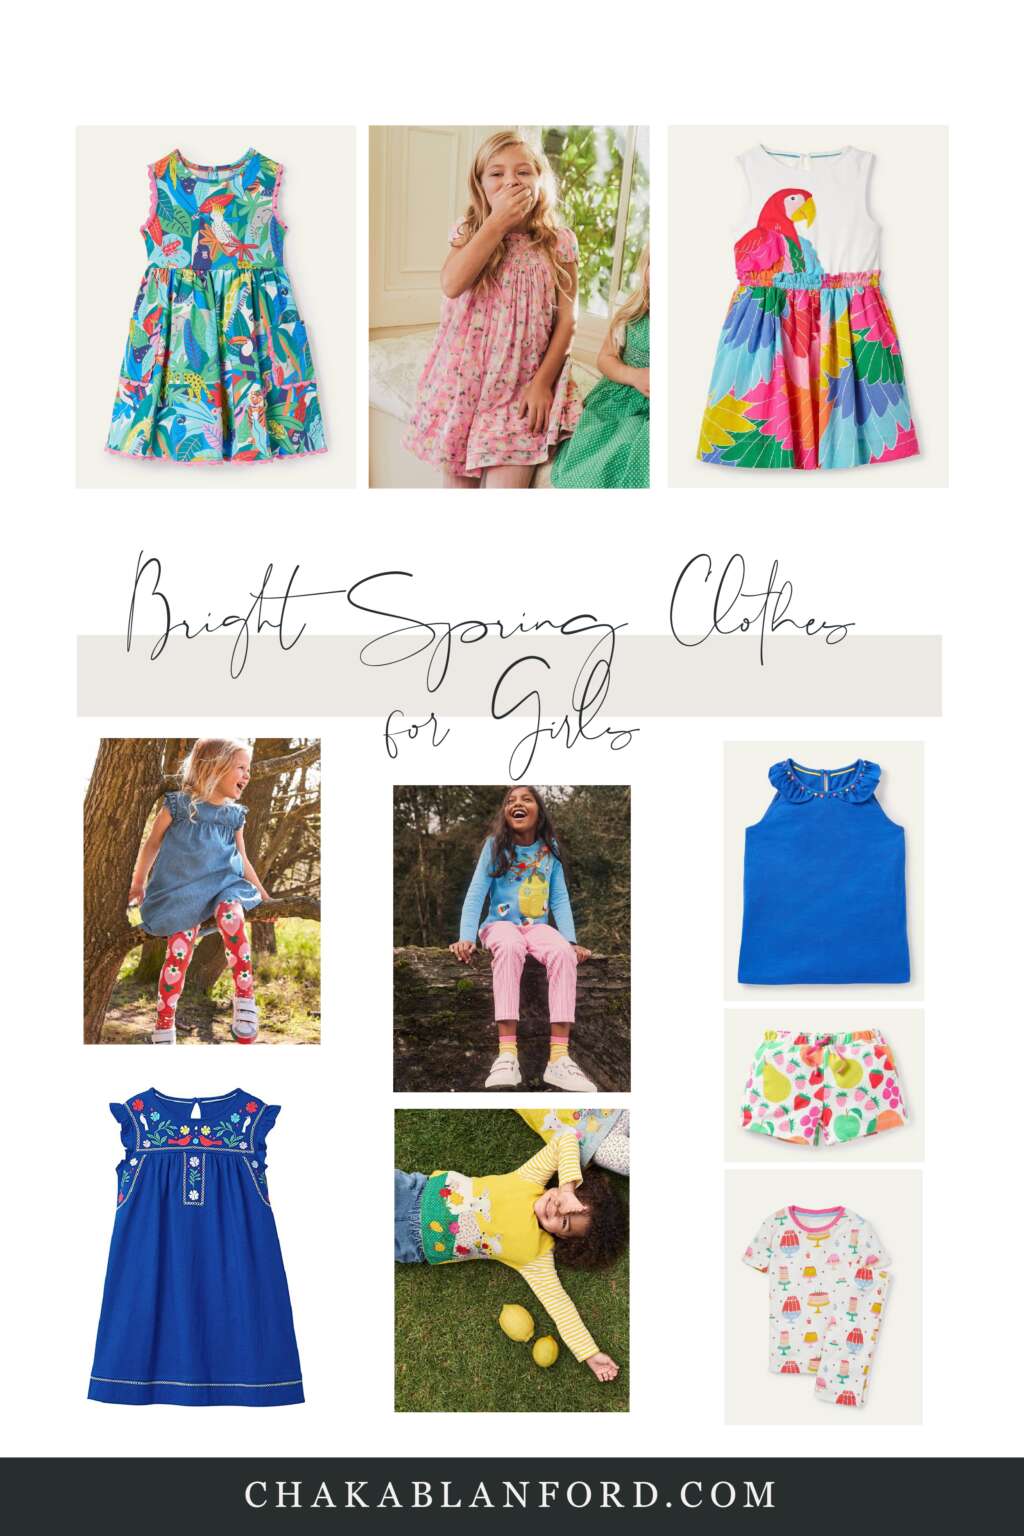 Adorable Spring Clothes for Kids - Chaka Blanford